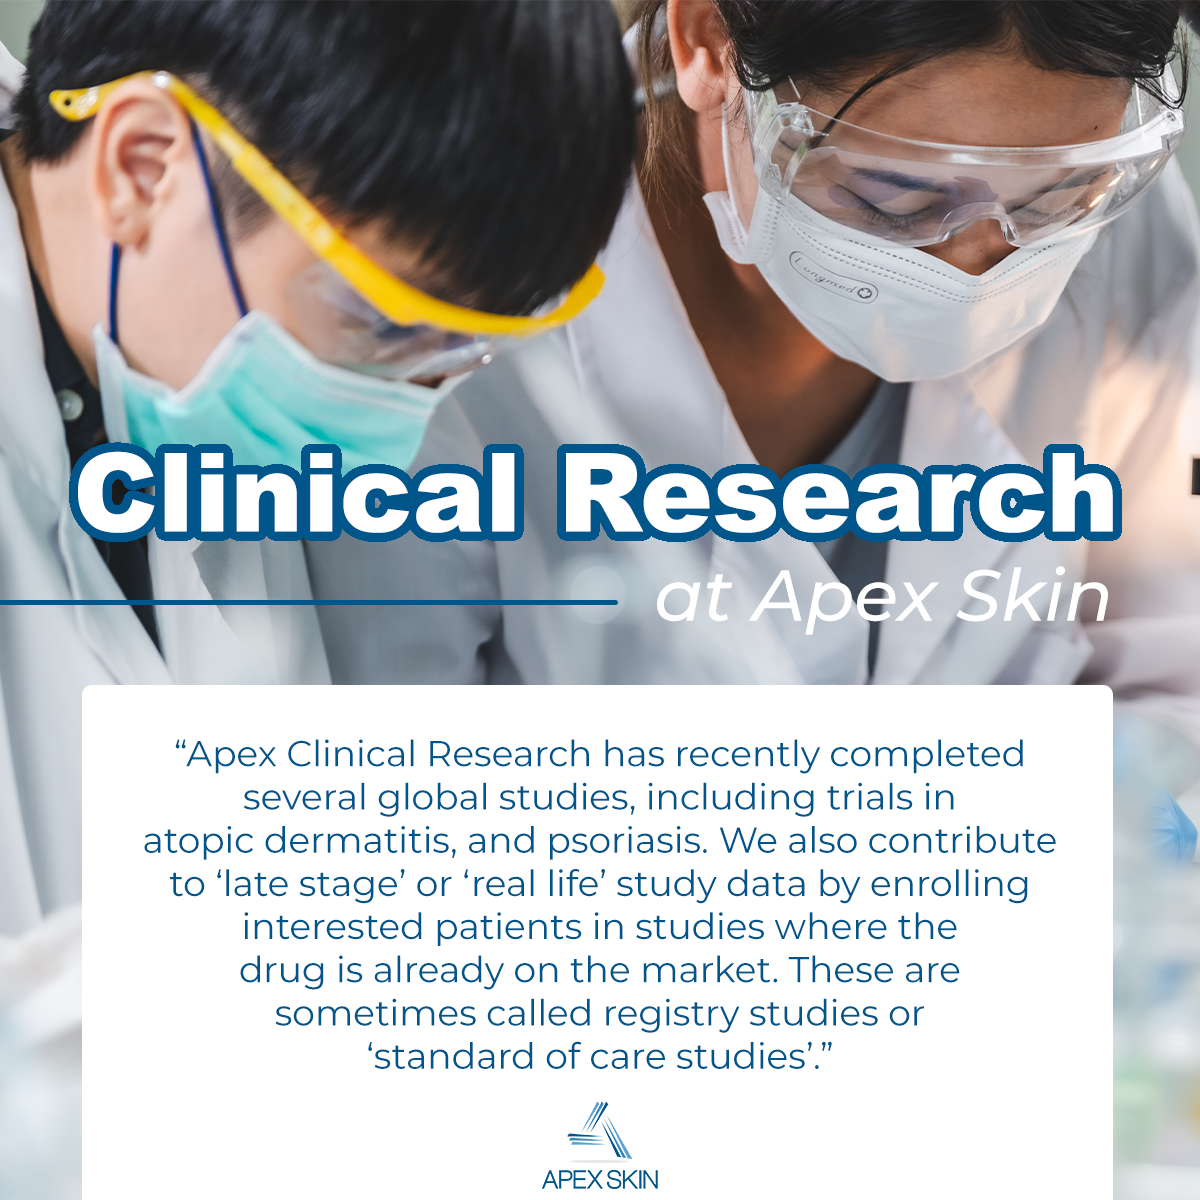 clinical research done at apex skin